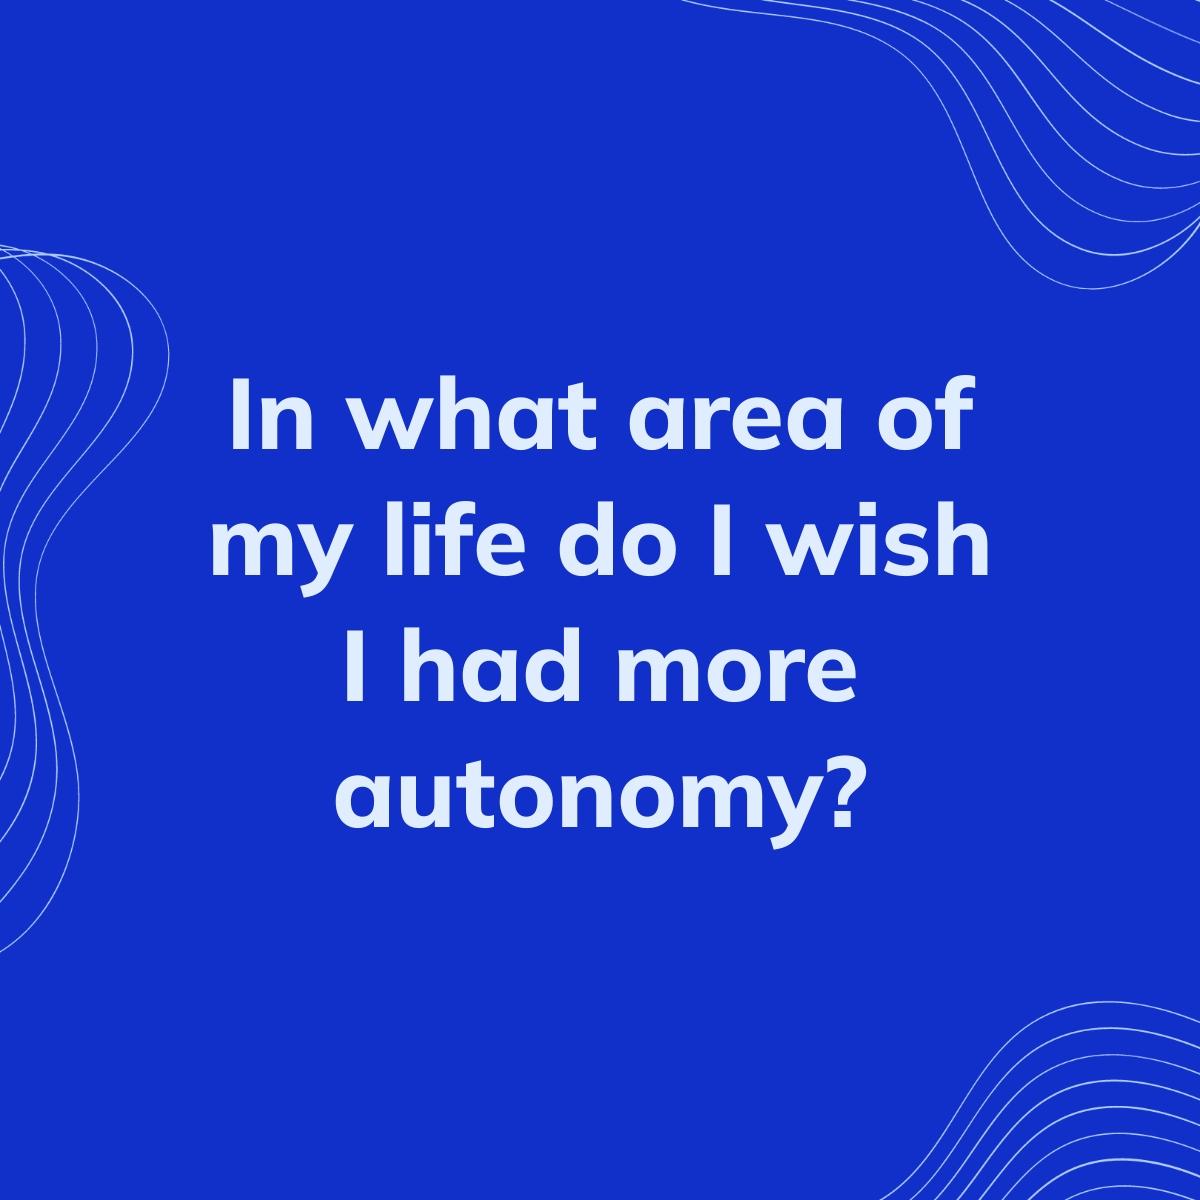 Journal Prompt: In what area of my life do I wish I had more autonomy?